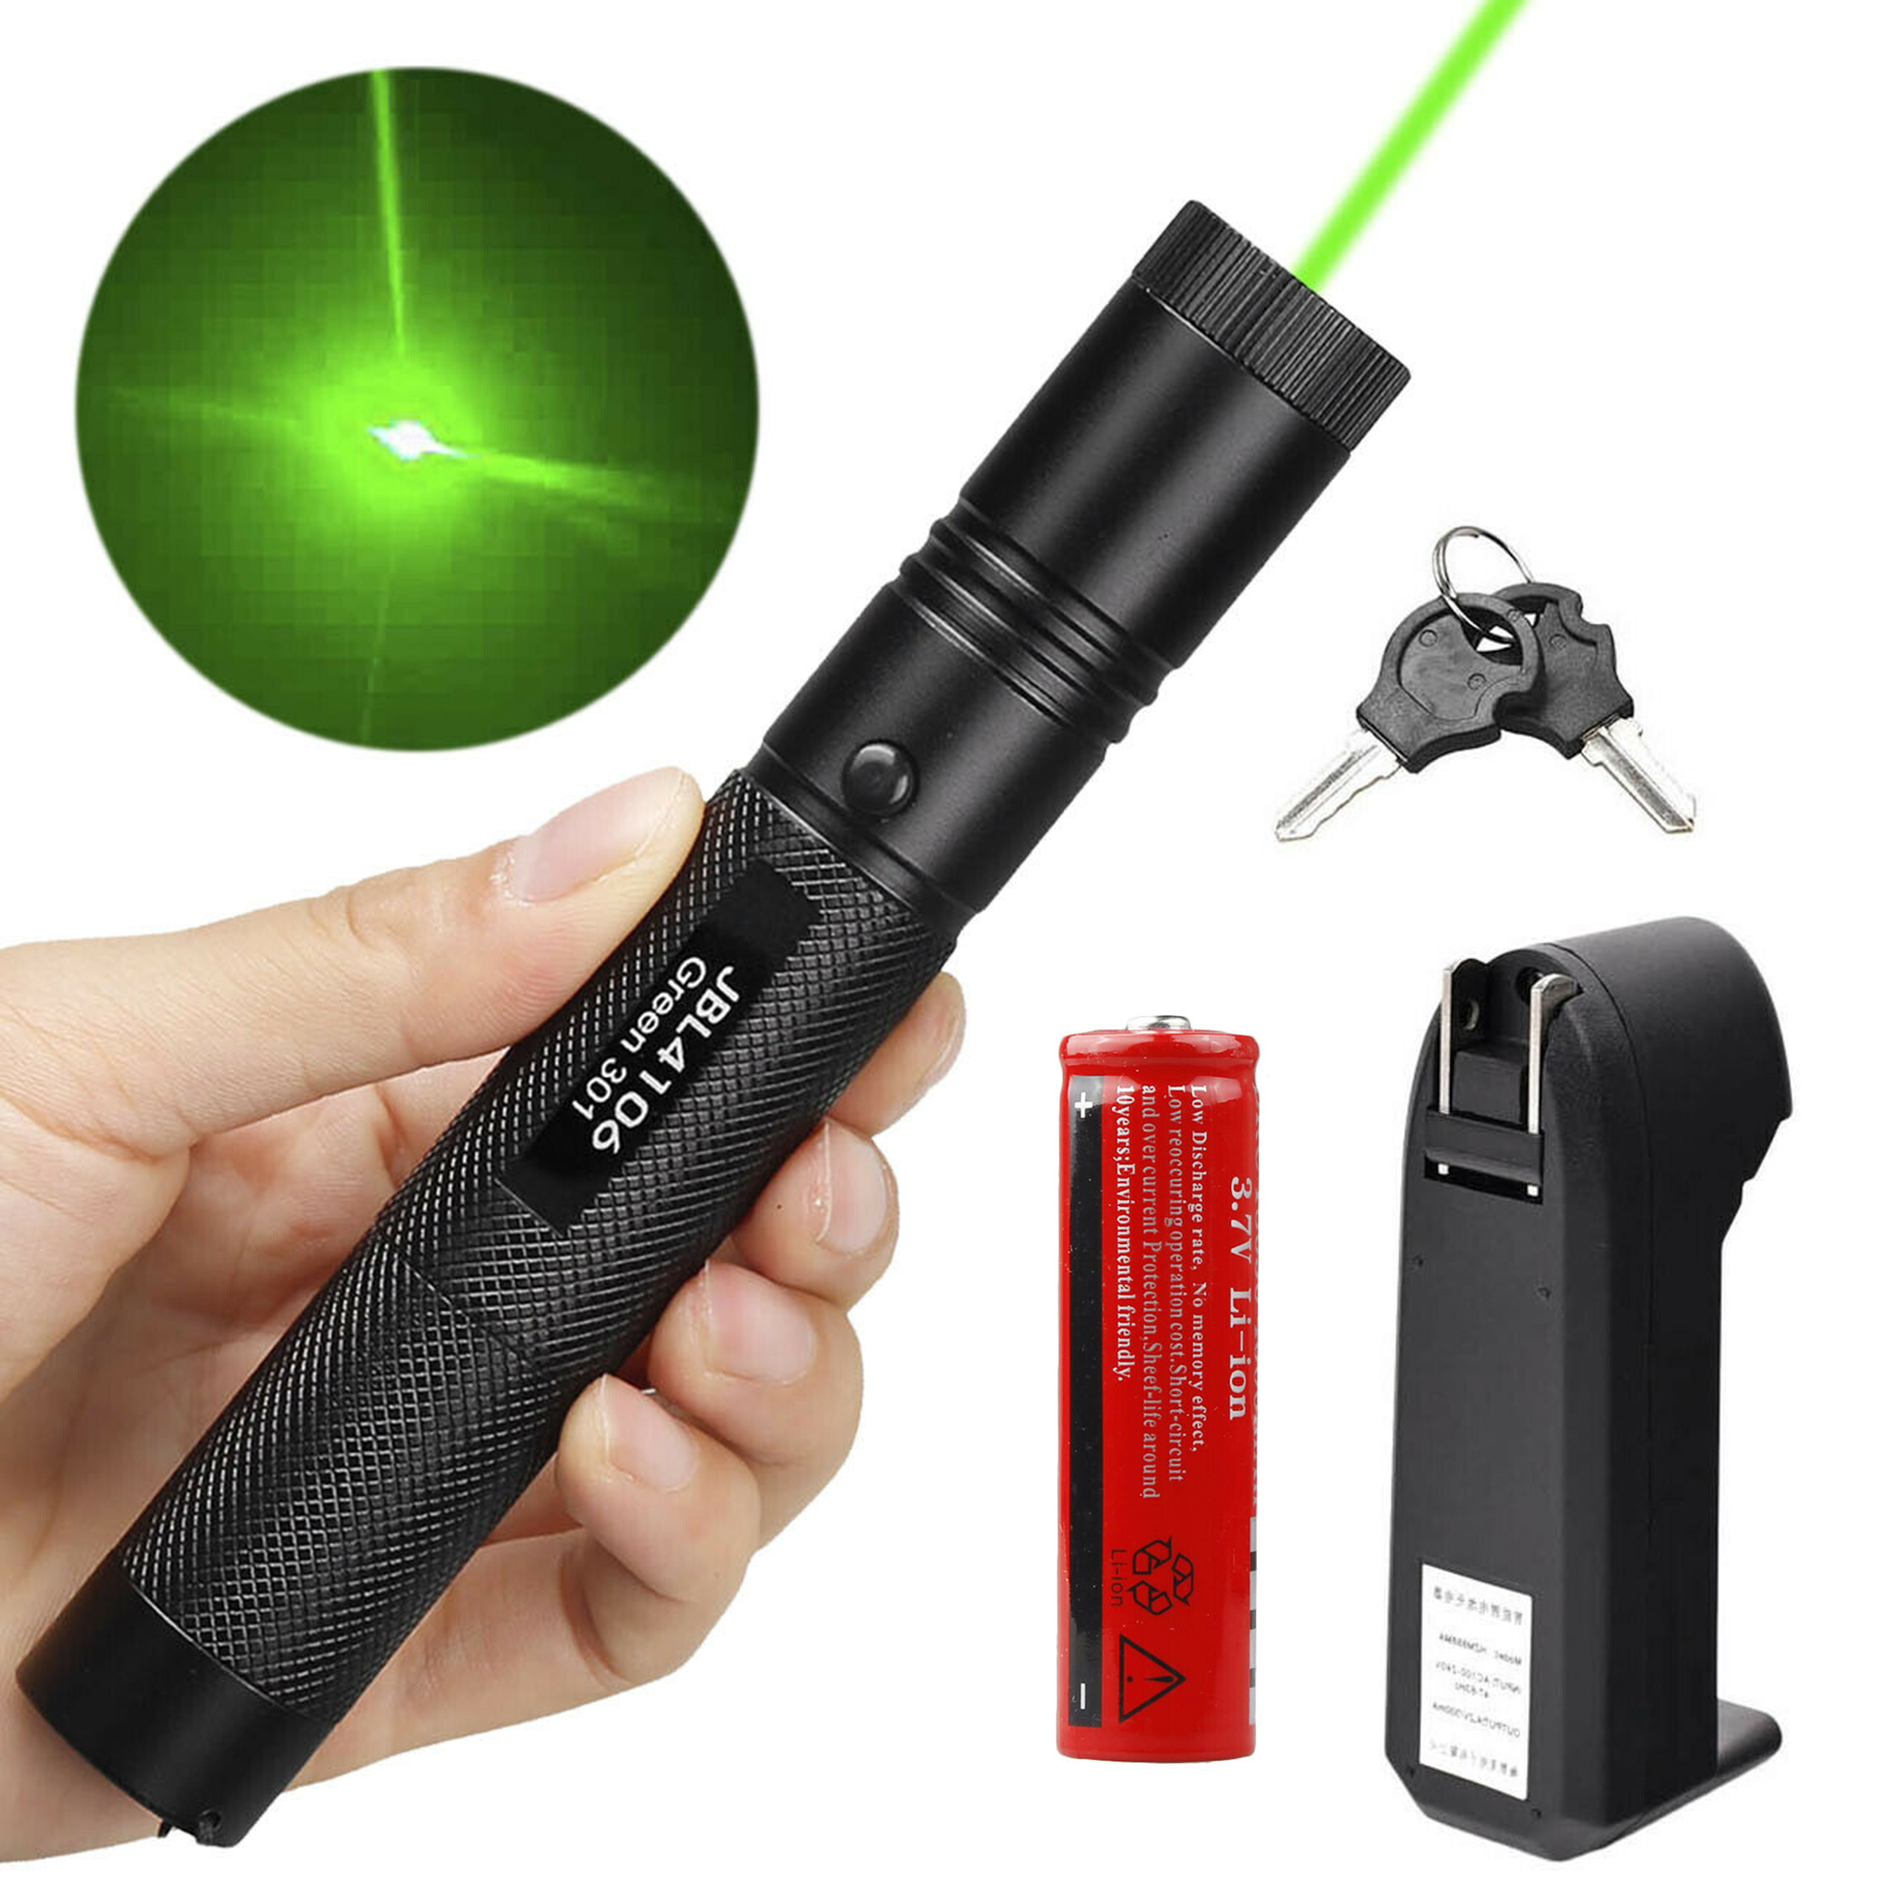 18650 battery Dual Charger 5mw 532nm Green Laser Pointer Lazer Pen Beam